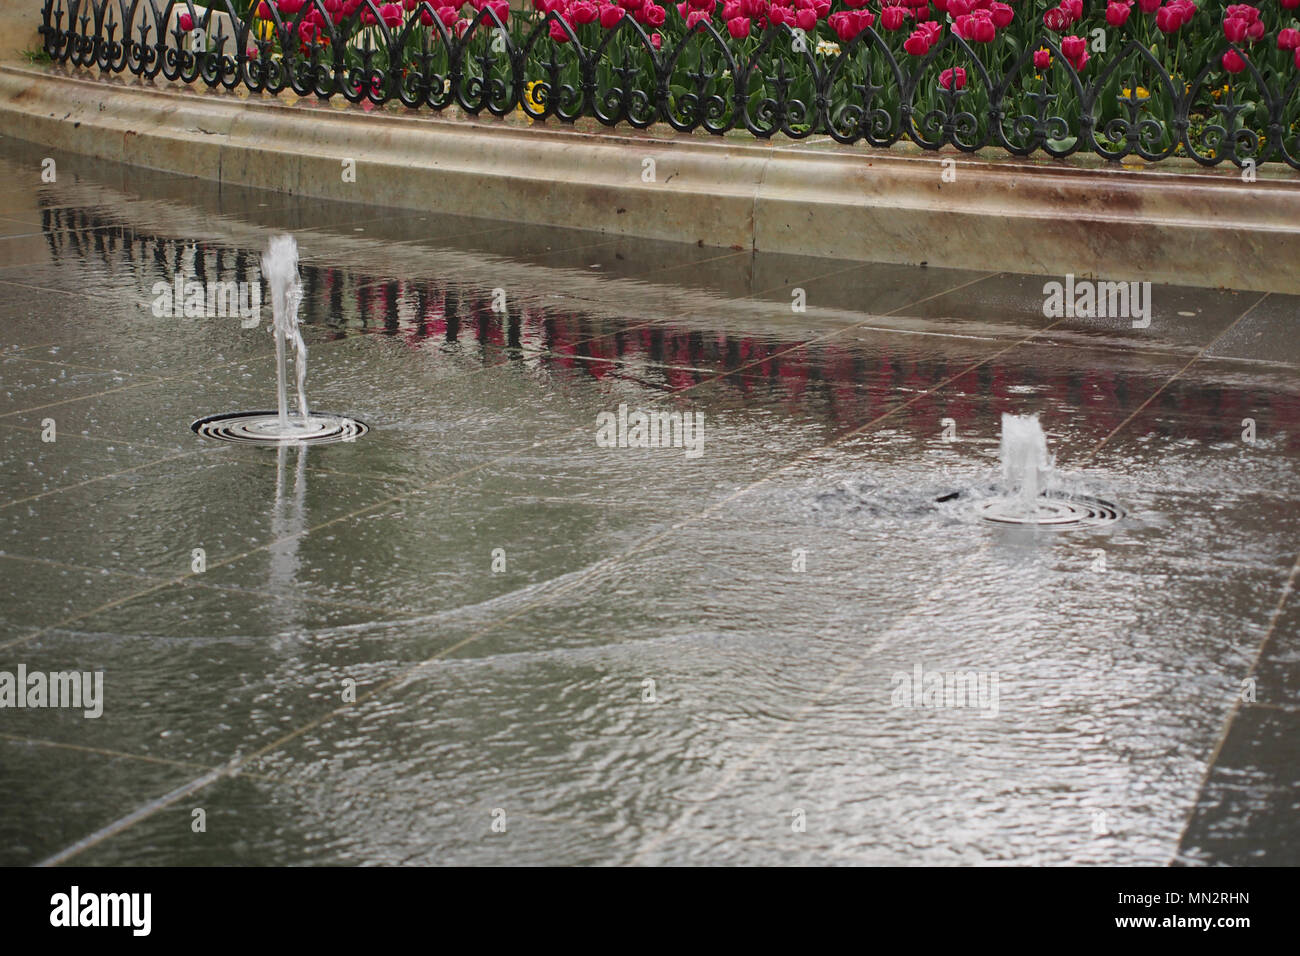 Leicester Square, London, water feature fountains with a back drop of a raised tulip bed Stock Photo